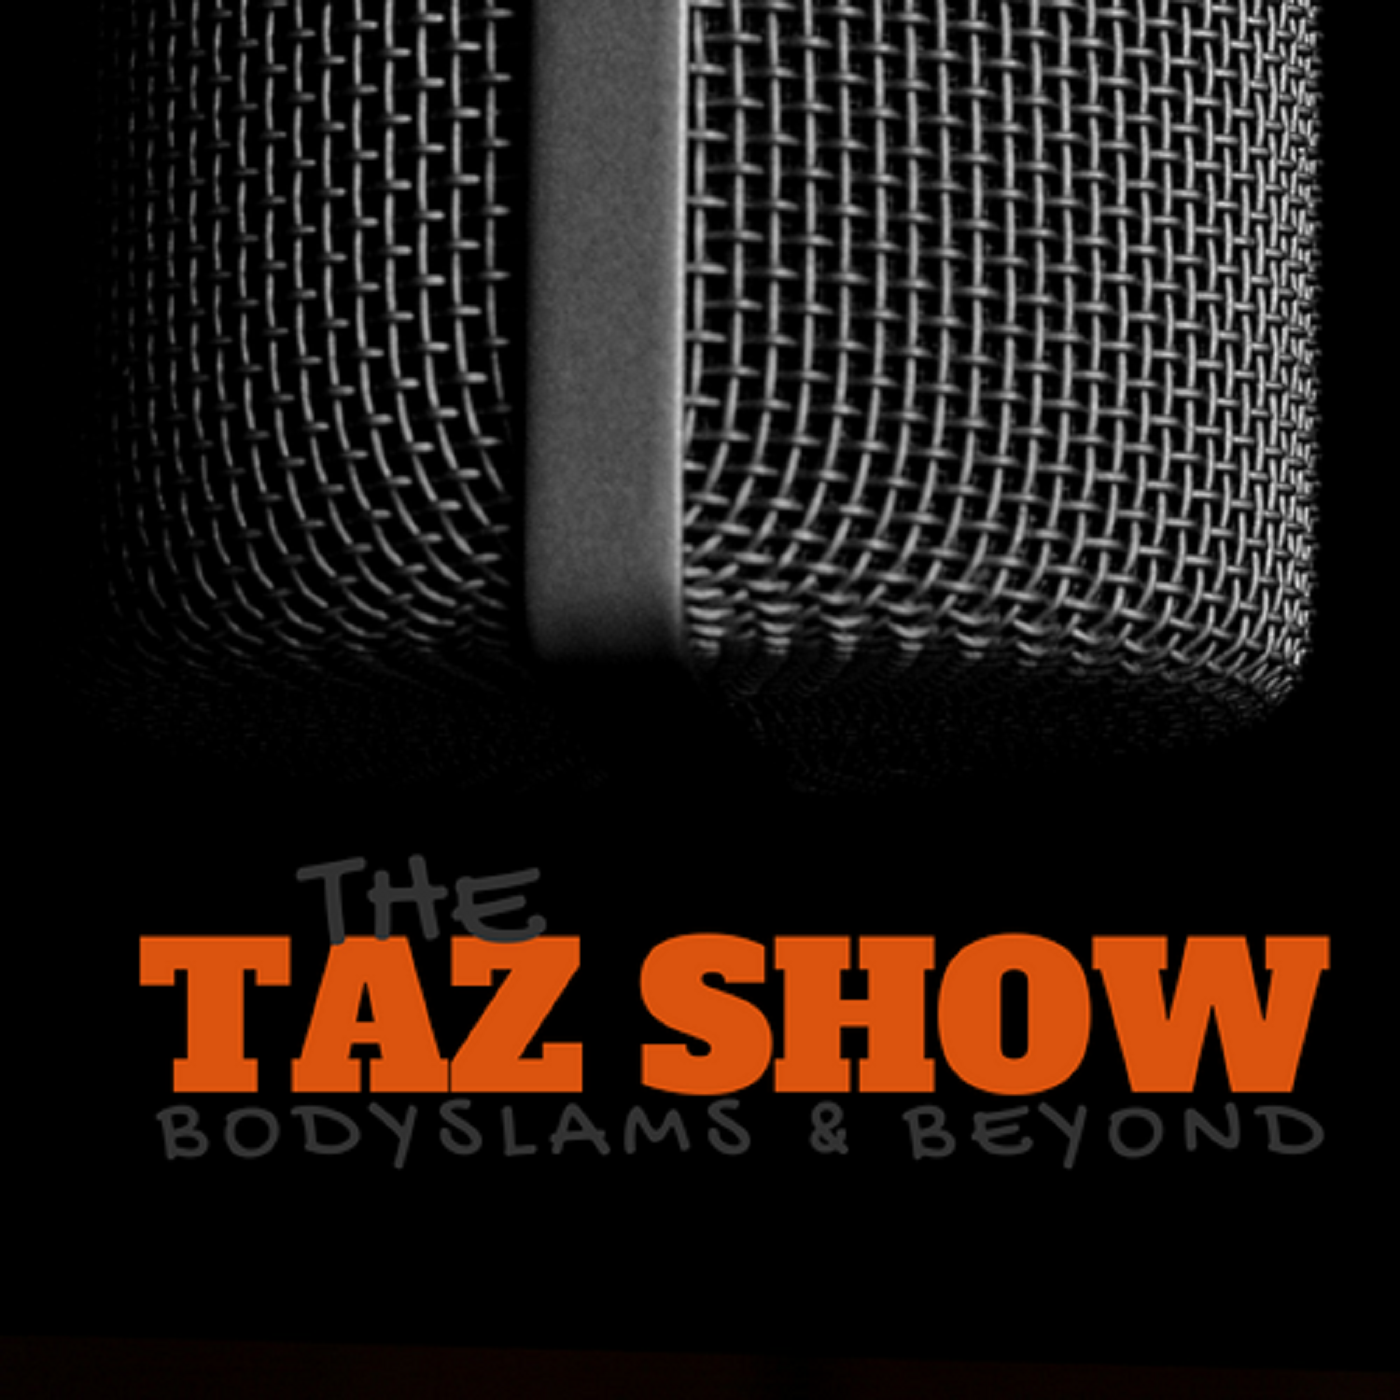 The Taz Show! Enter the New Producer!